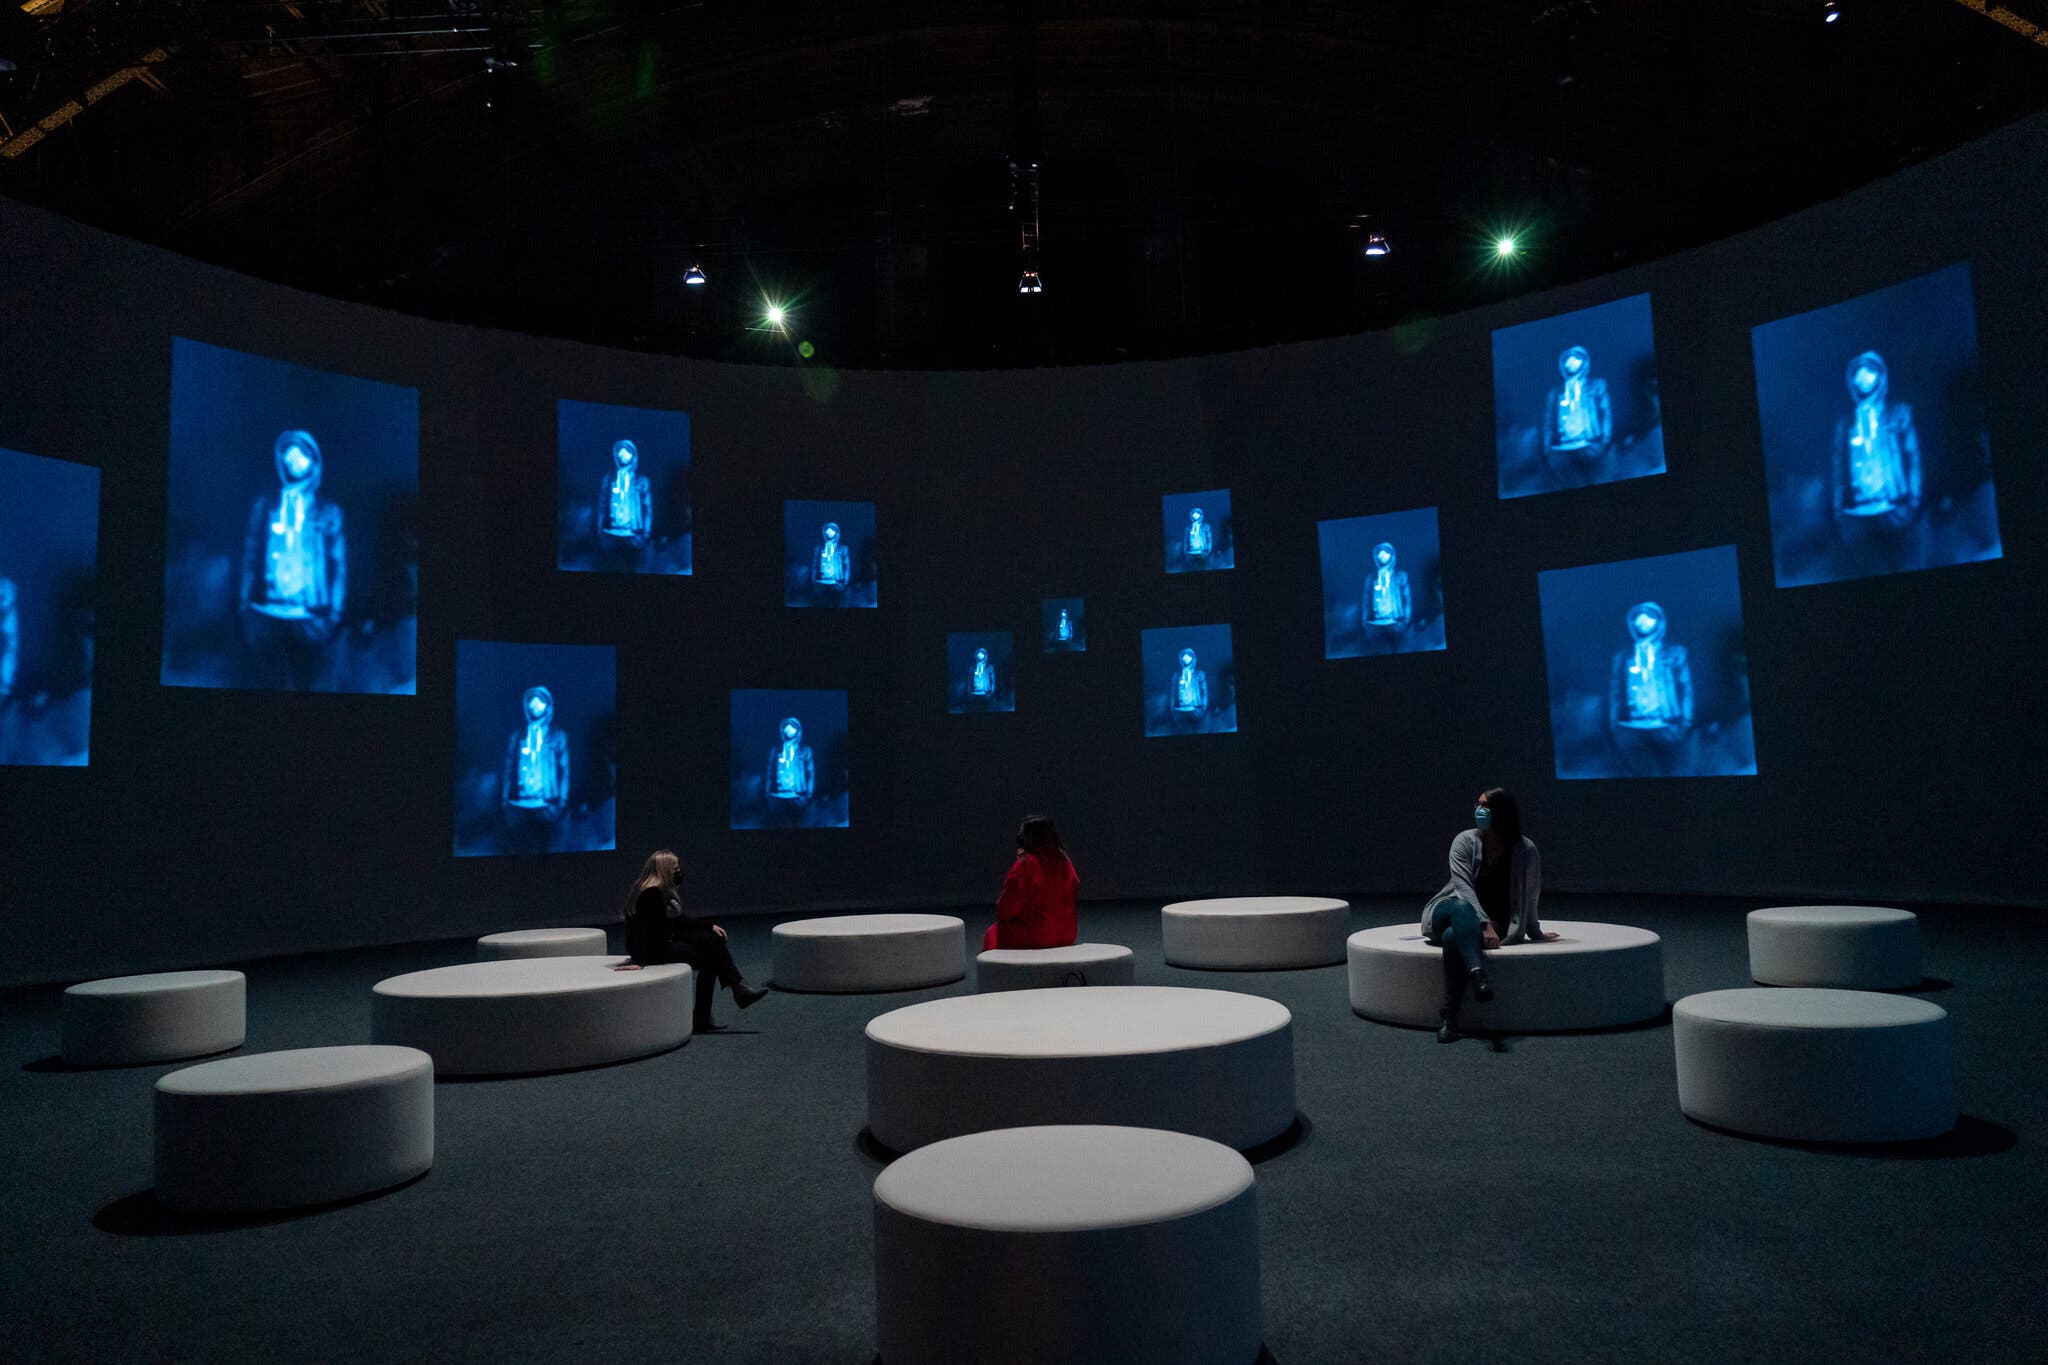 Installation photograph of people seated in a gallery surrounded by variou screens projecting identical images of a young man wearing a hoodie